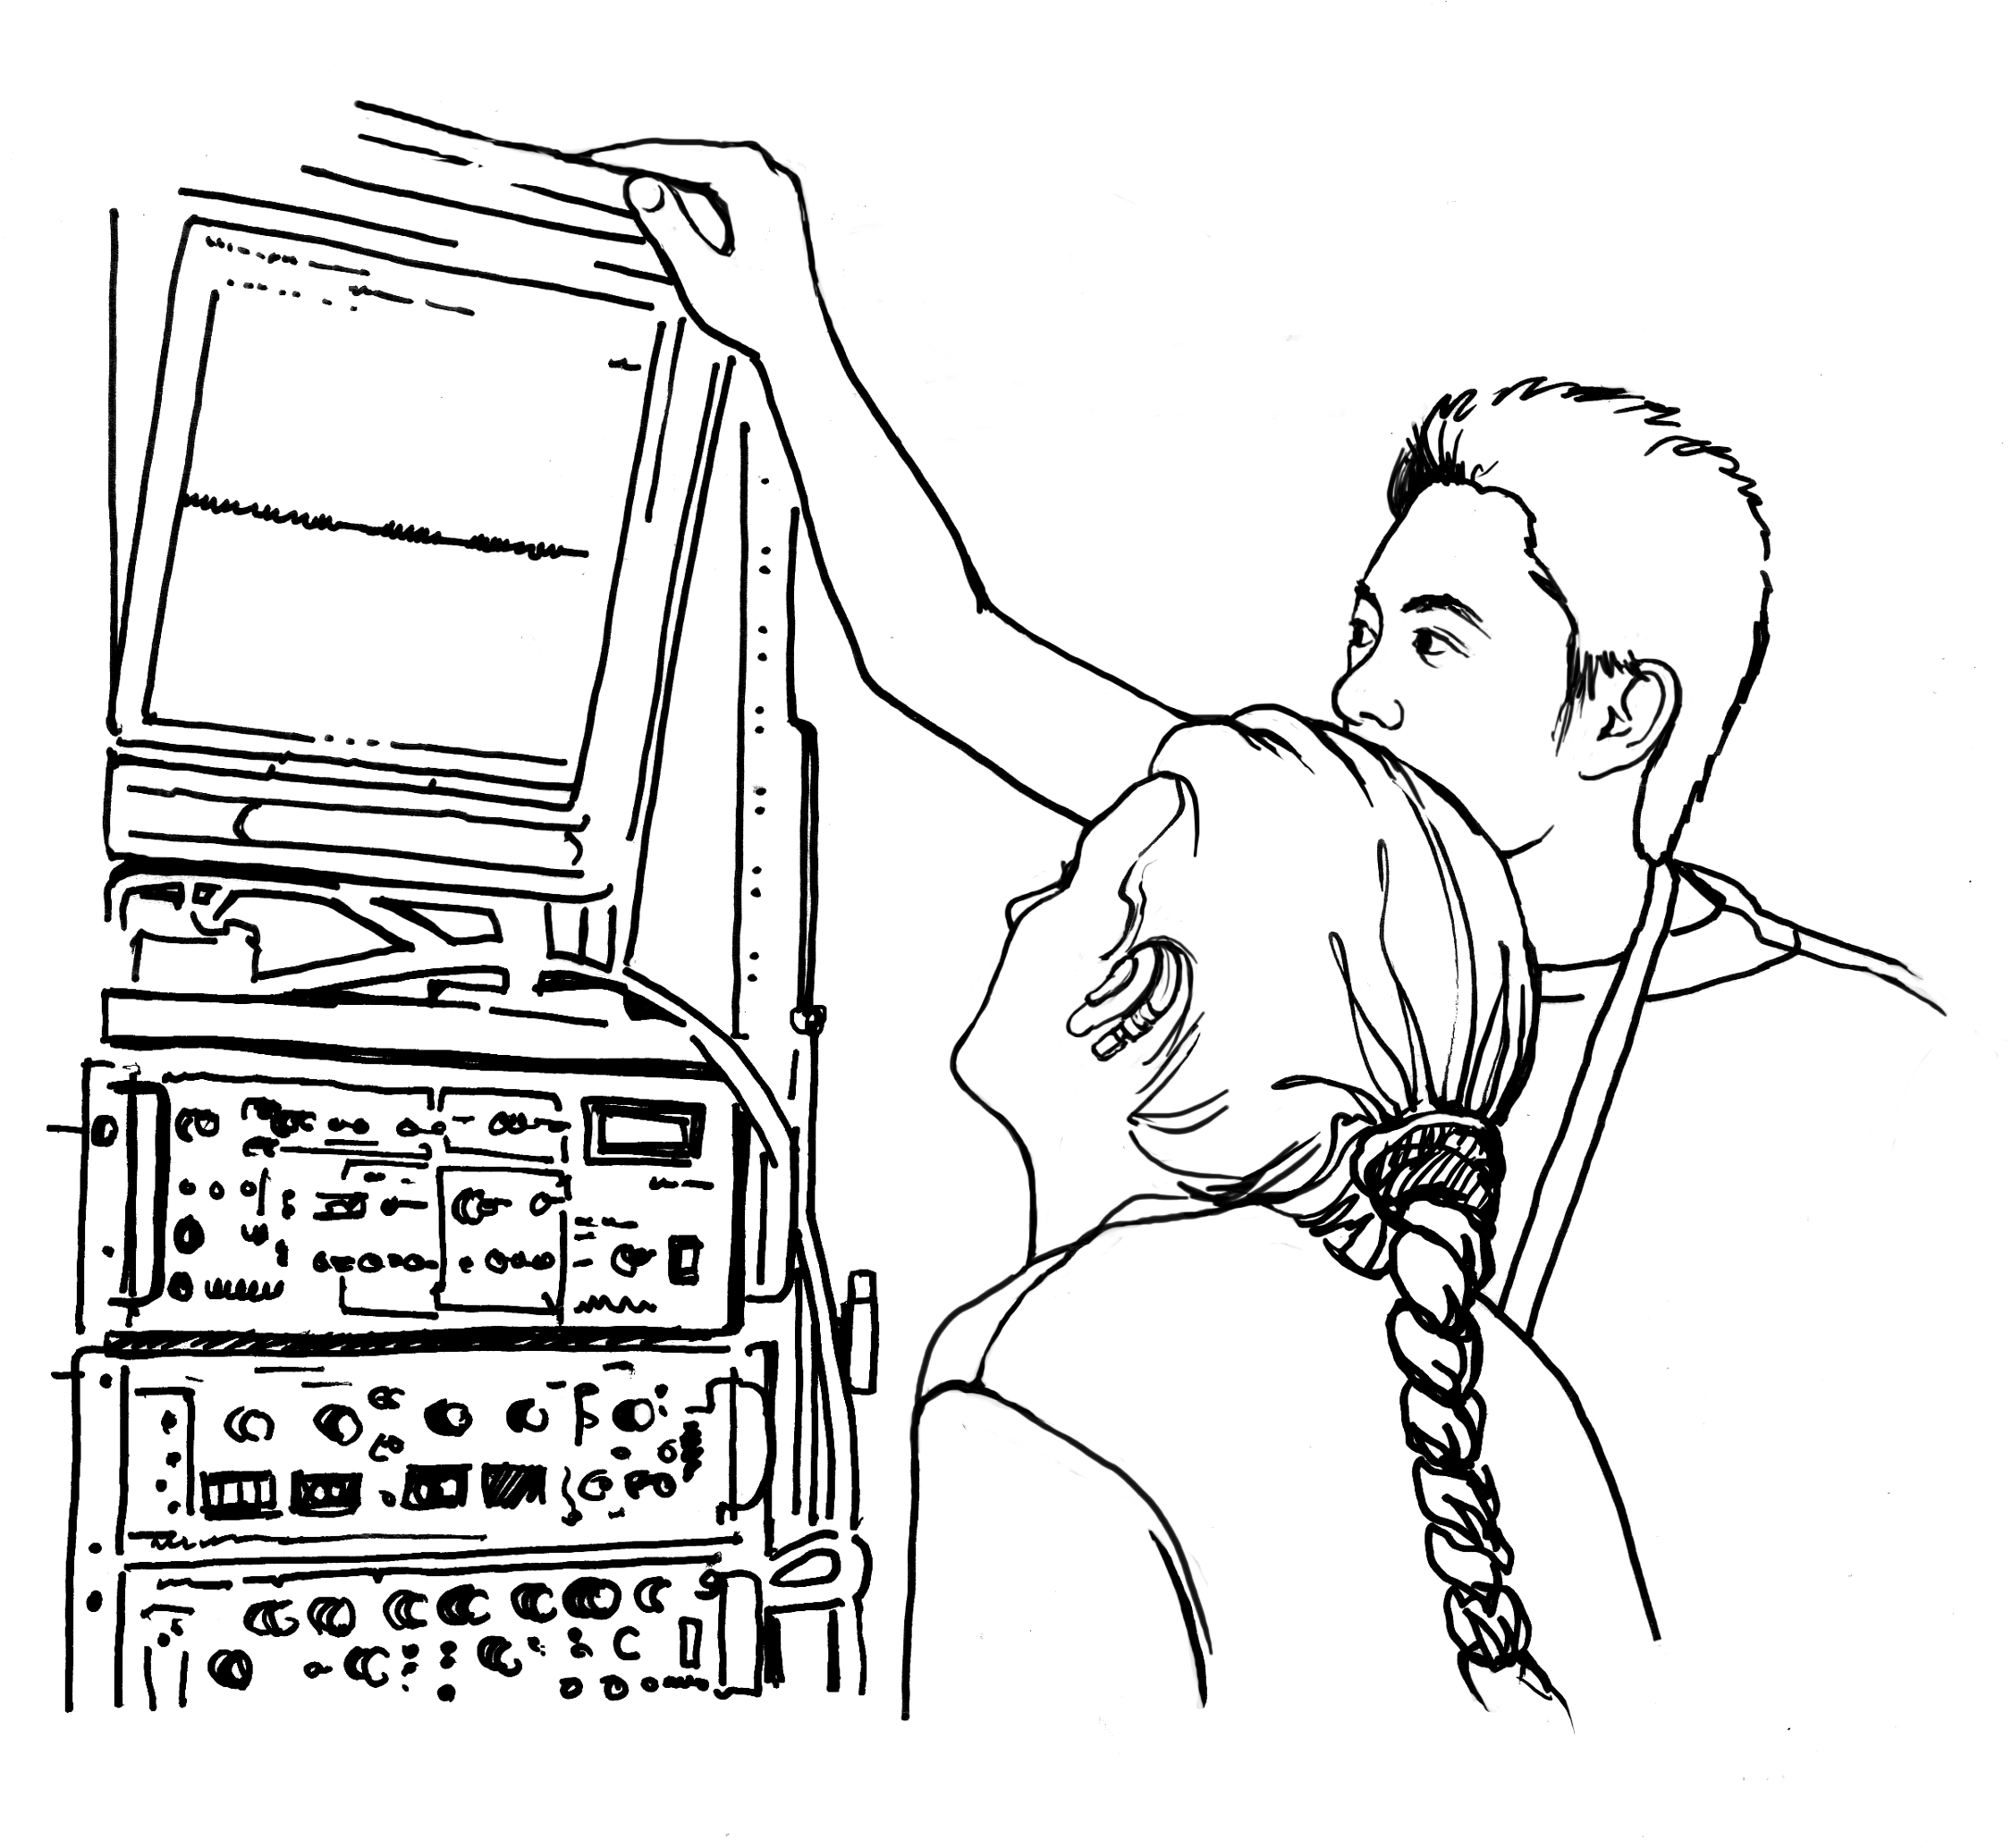 Two people staring at a data visualization above a stack of hardware with many controls.